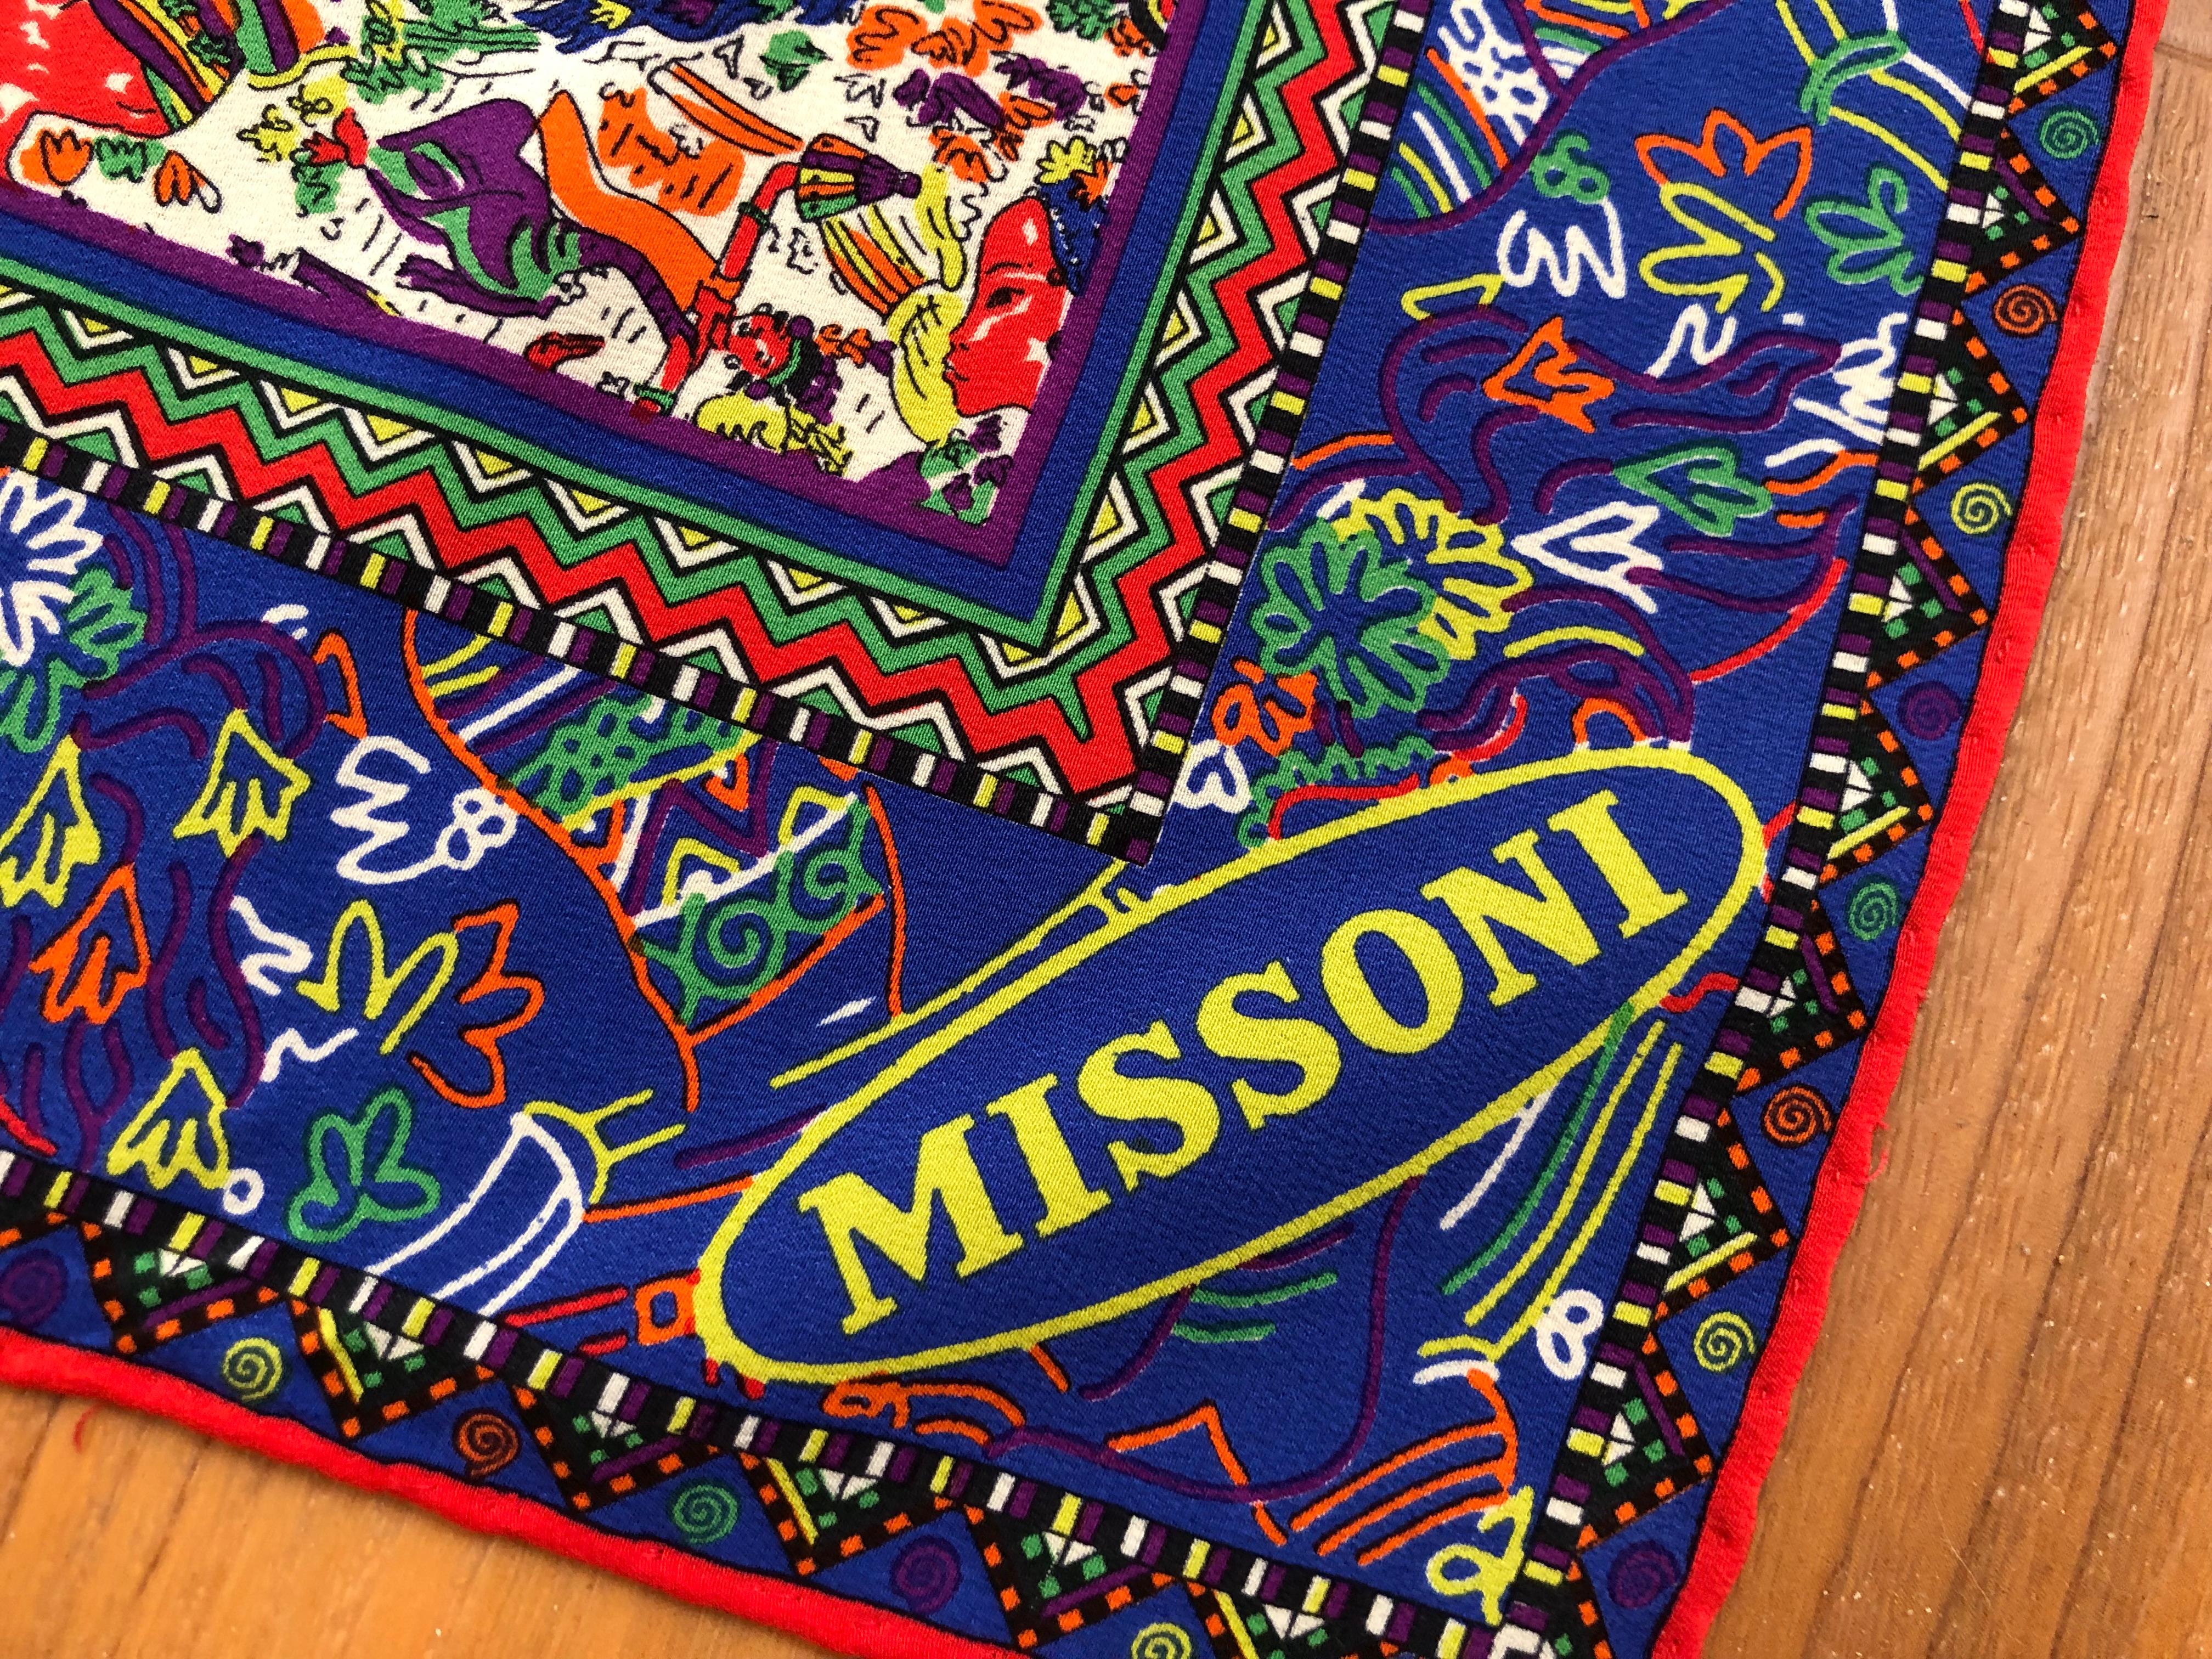 This Missoni scarf is in superb condition. The exotic figures and abstract designs are very colorful and will dress up any outfit. The hems are hand rolled and plump.